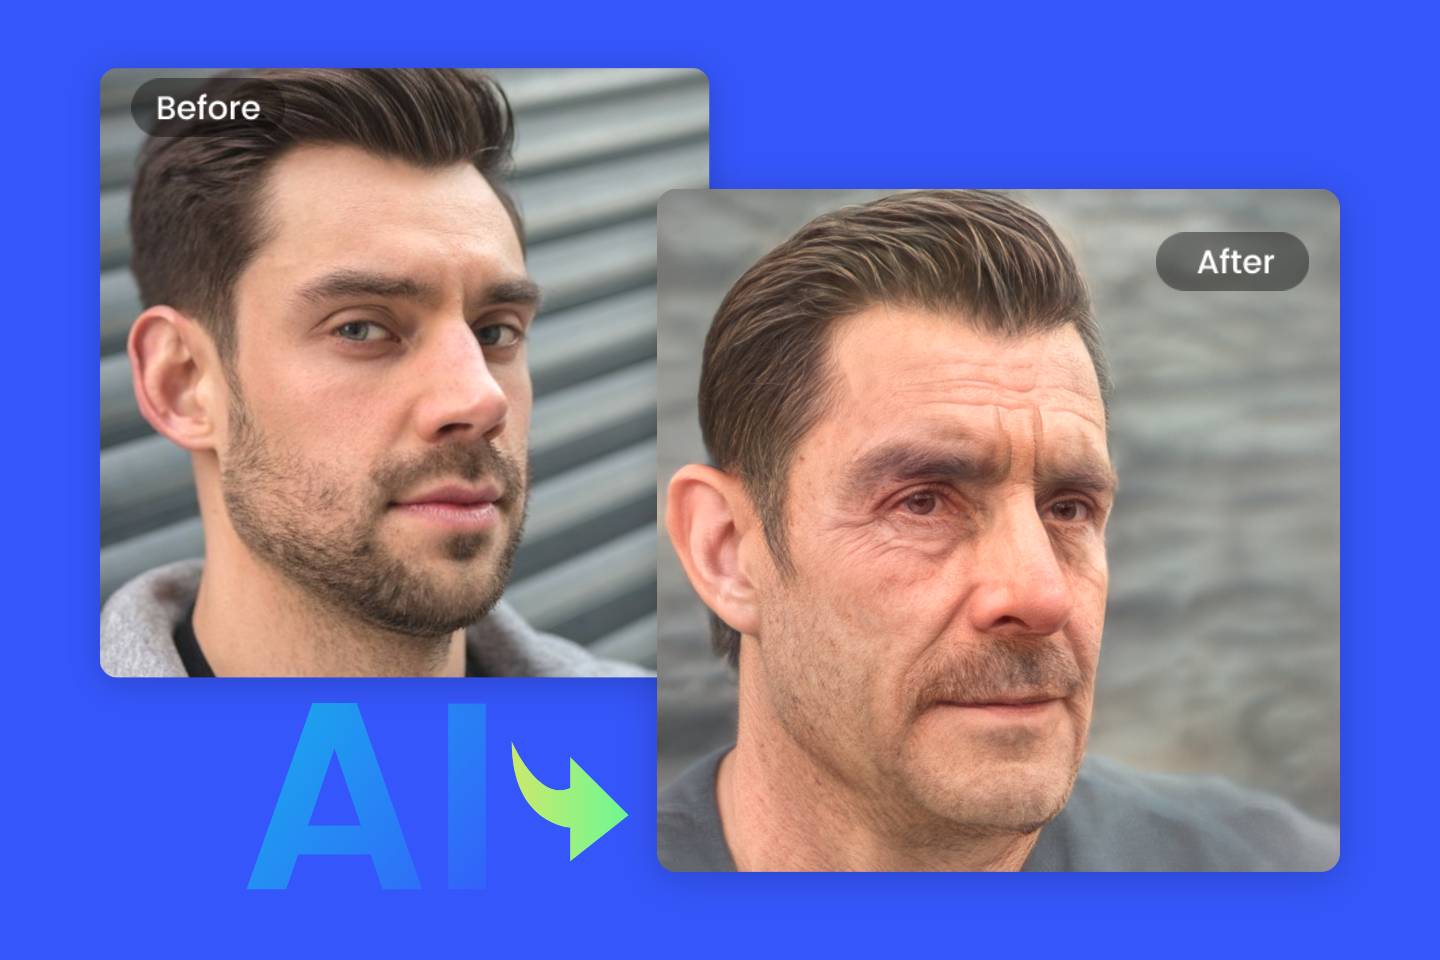 Old Filter Online Free: Change Your Age to Old Look